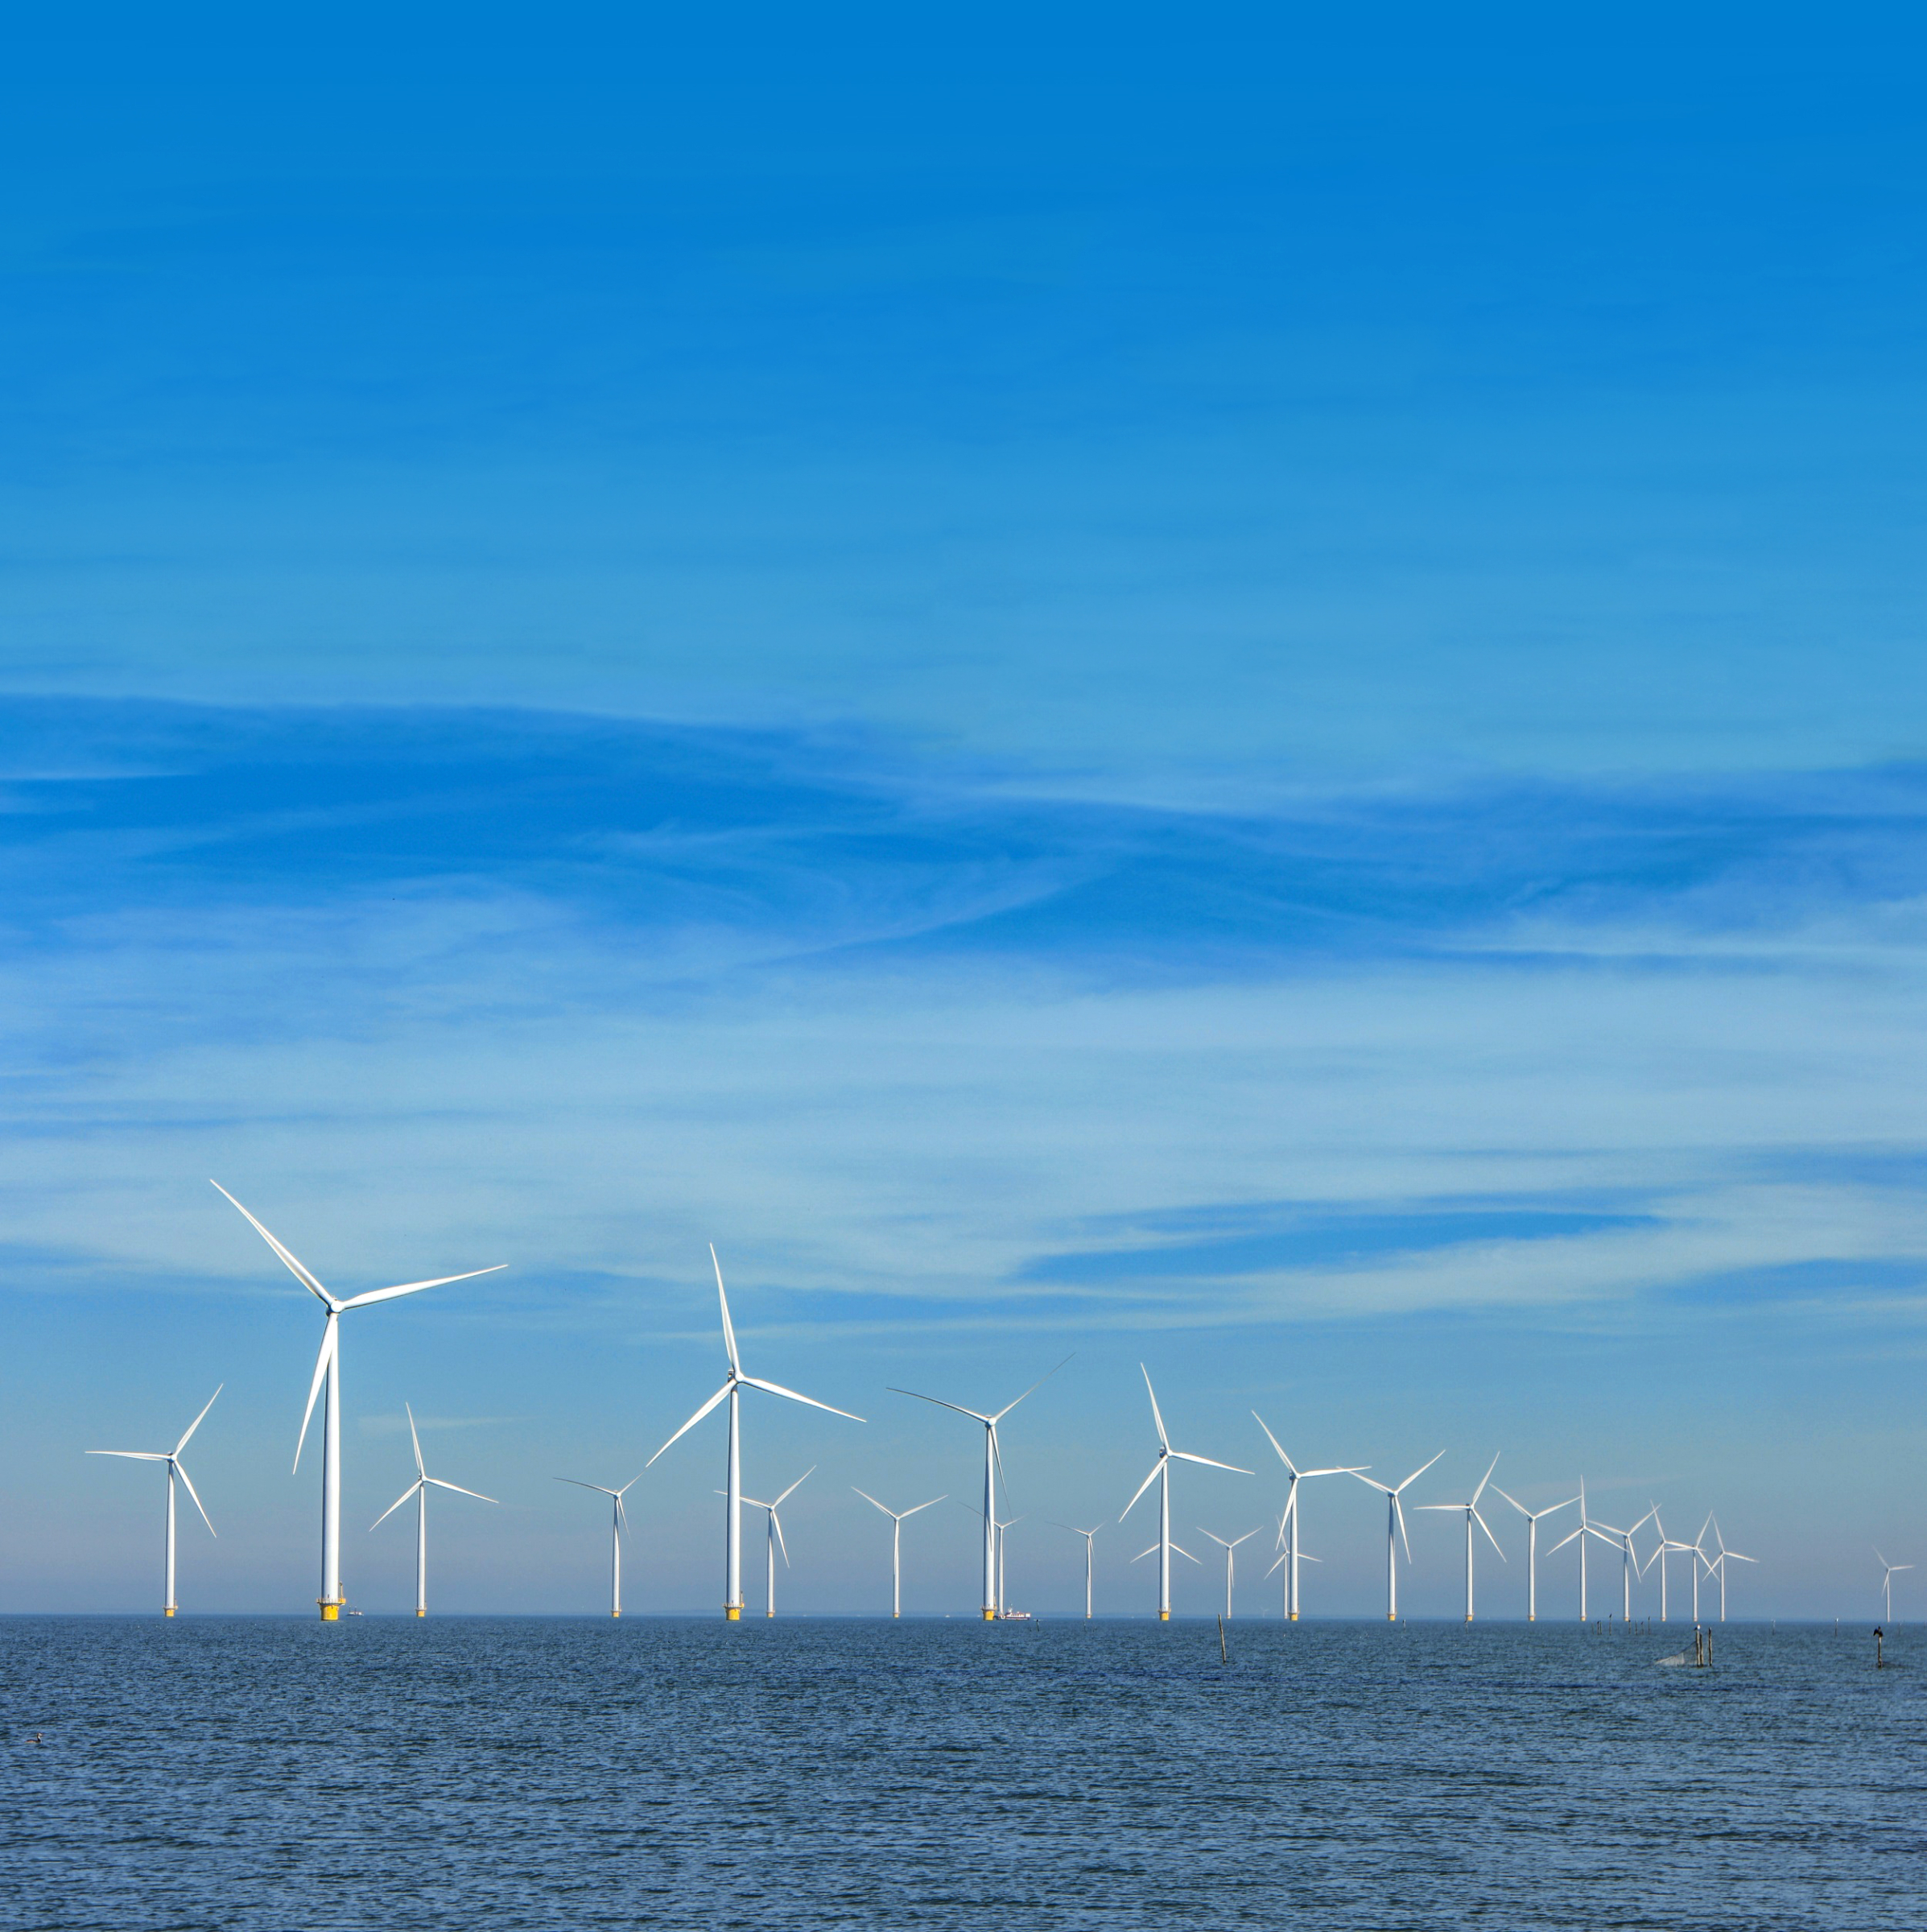 Europe’s offshore wind industry is taking off